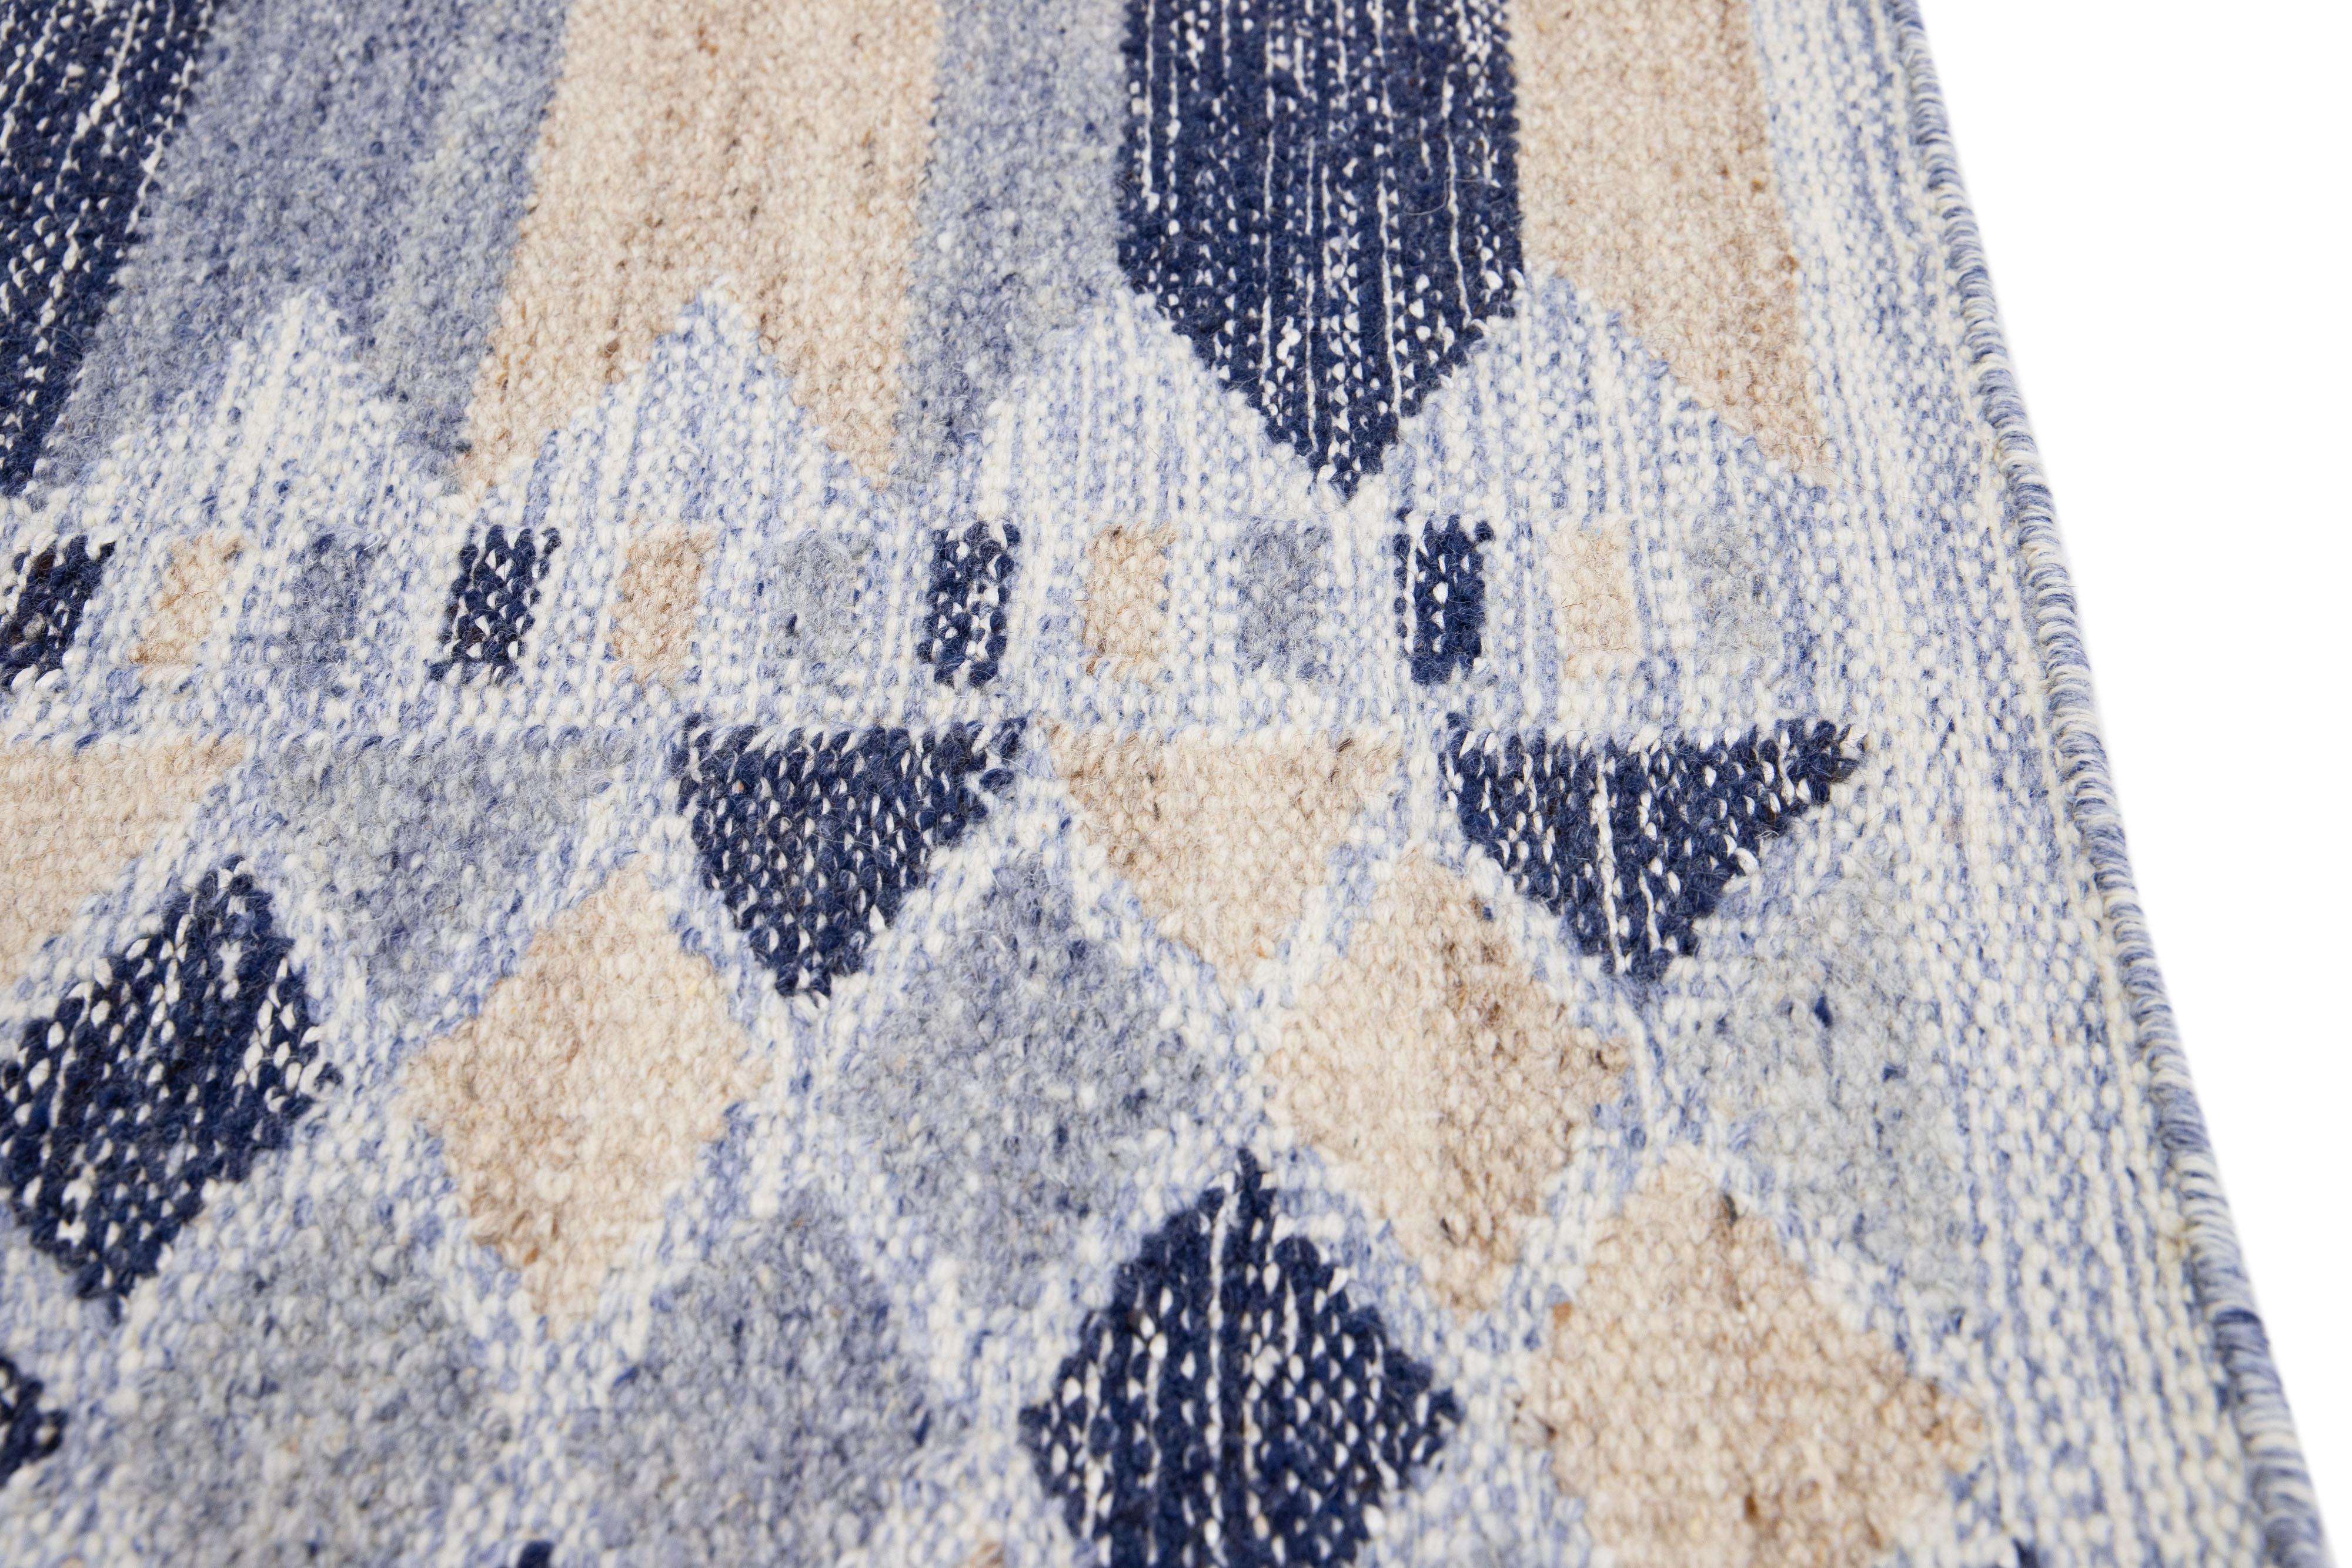 Apadana's Modern Swedish Style wool custom rug. Custom sizes and colors made-to-order.

Material: Wool.
Techniques: Hand-Woven.
Style: Modern Swedish.
Lead time: Approx. 15-16 weeks available.
Colors: As shown, other custom colors are